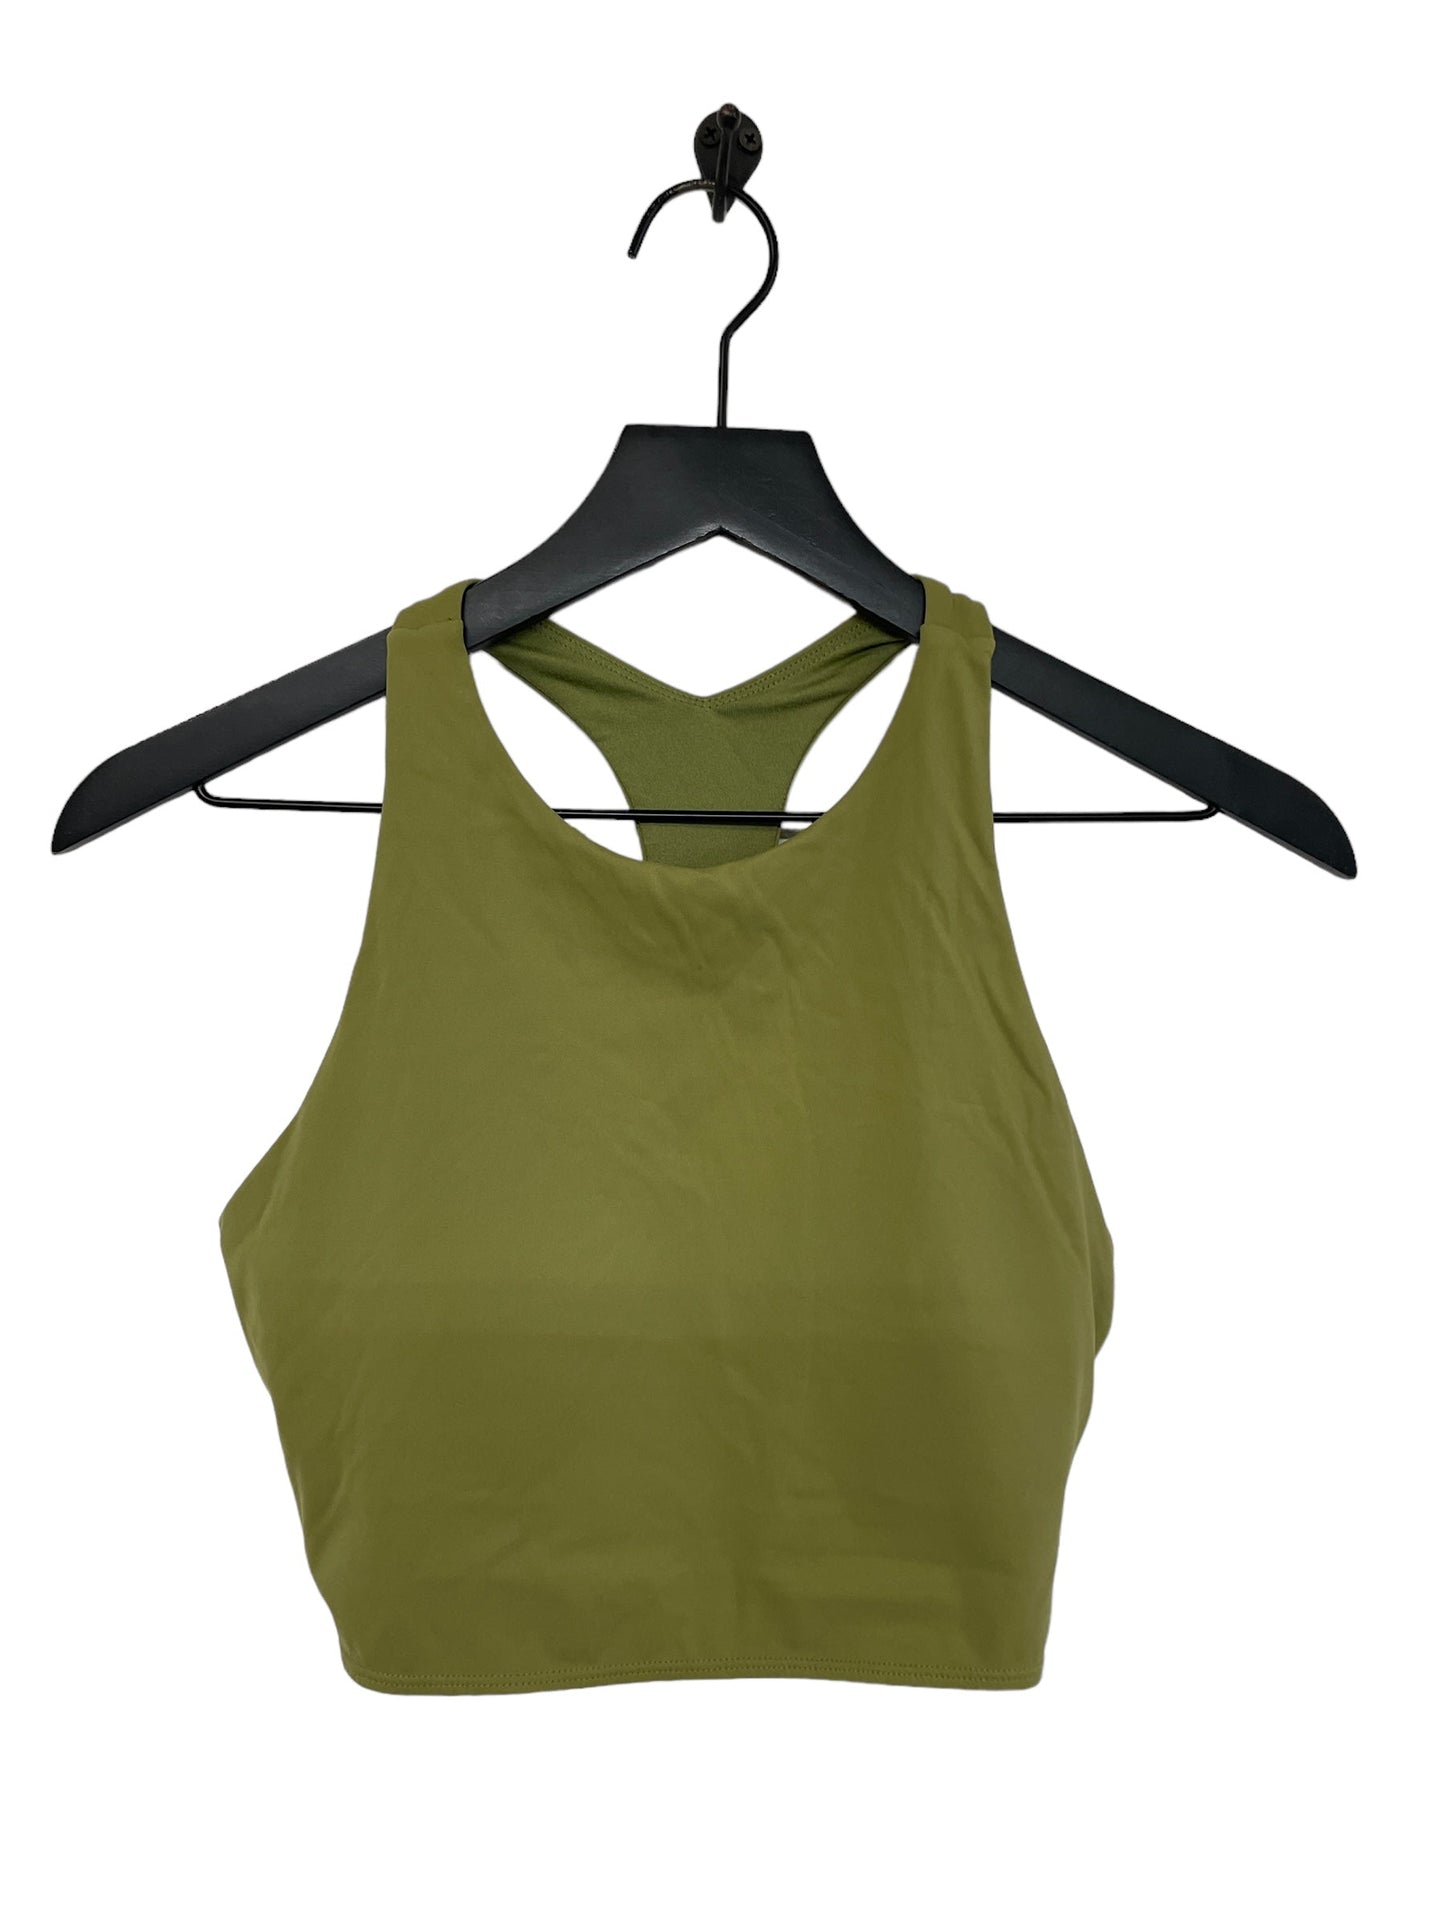 Green Athletic Bra Clothes Mentor, Size M